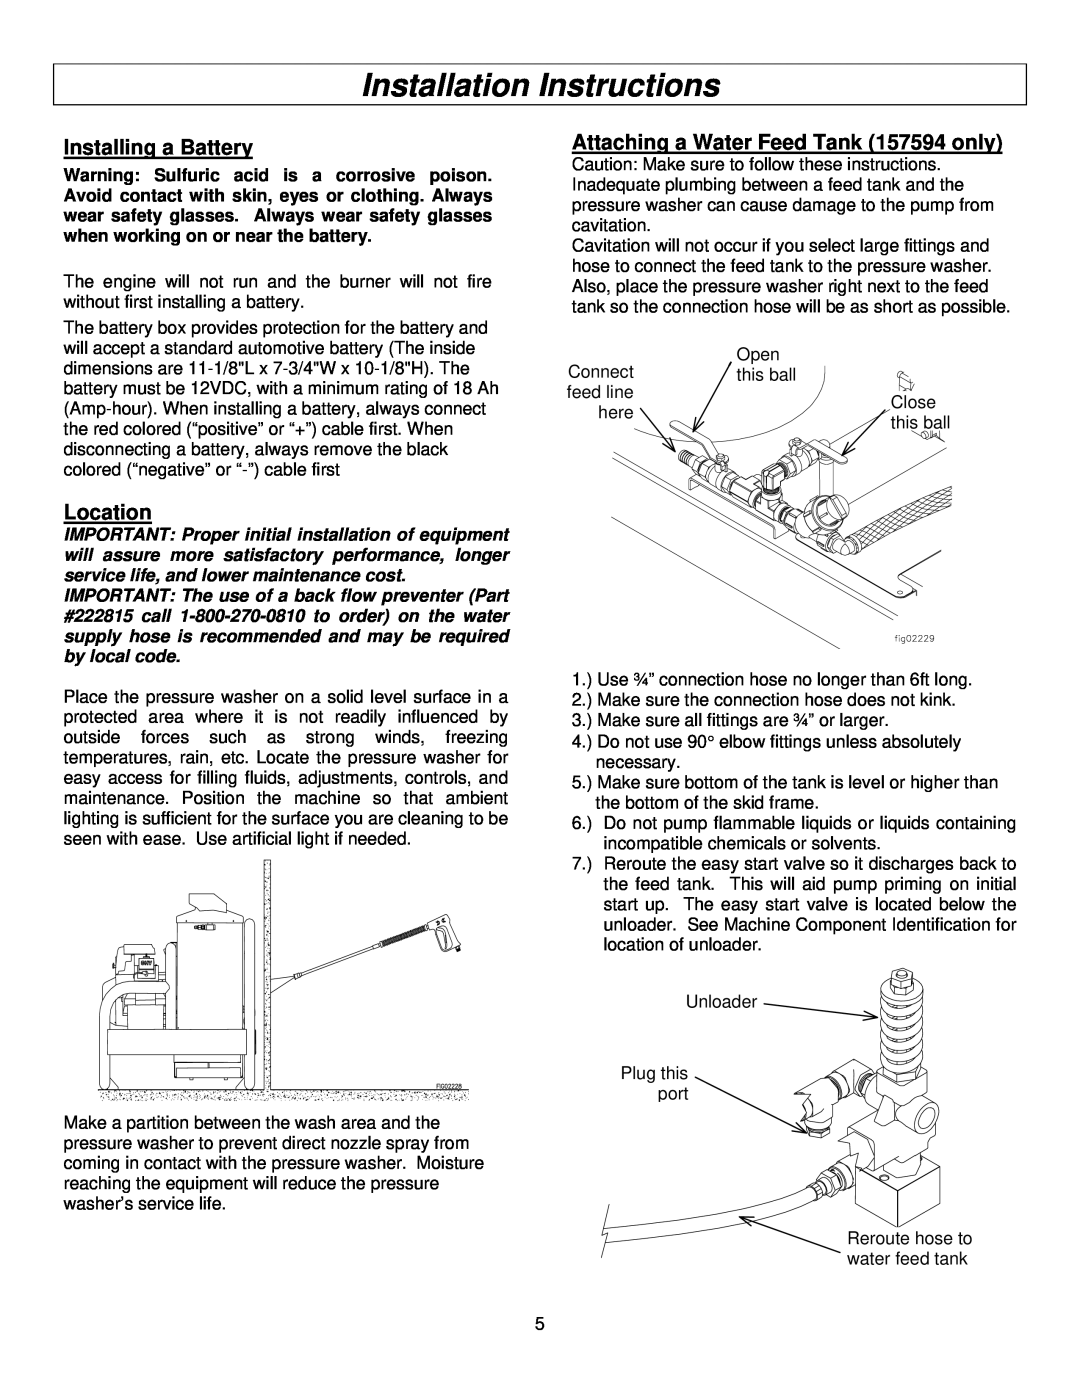 North Star M157594I Installation Instructions, Installing a Battery, Location, Attaching a Water Feed Tank 157594 only 